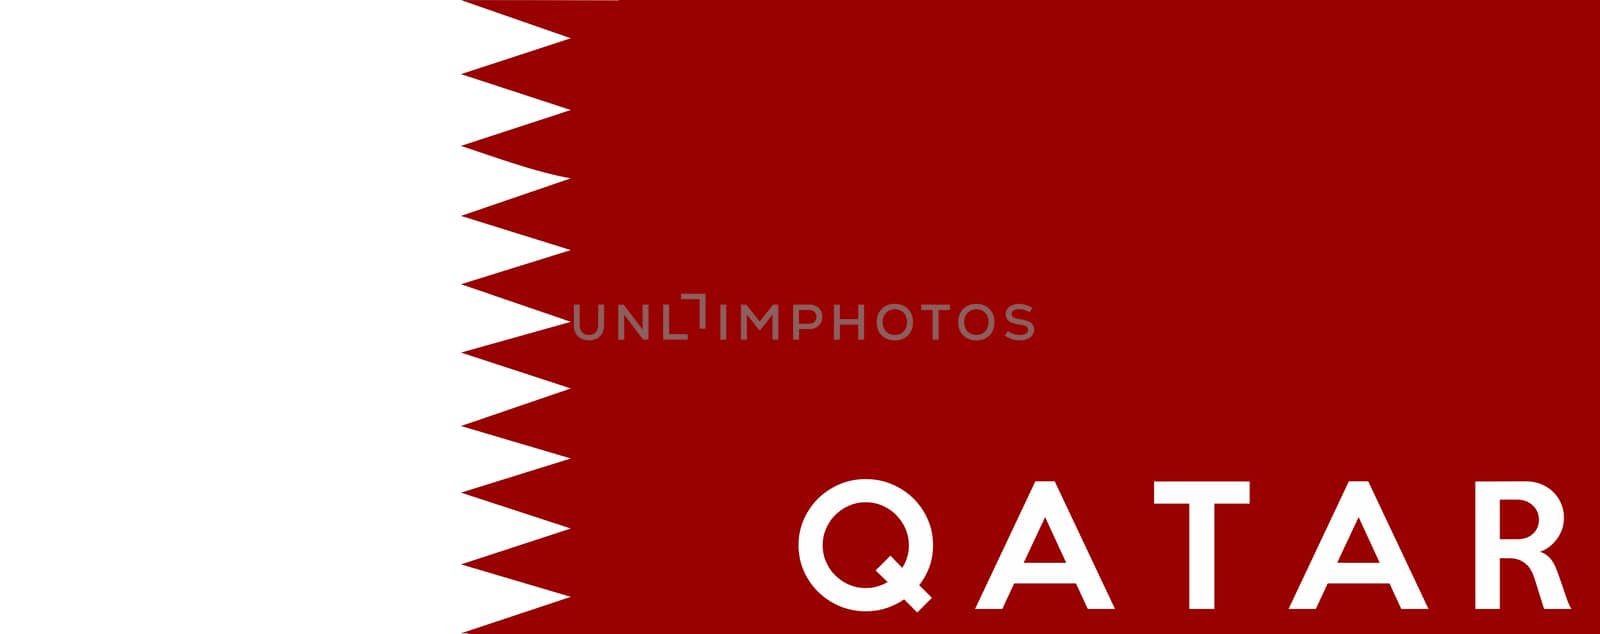 very big size illustration country flag of Qatar